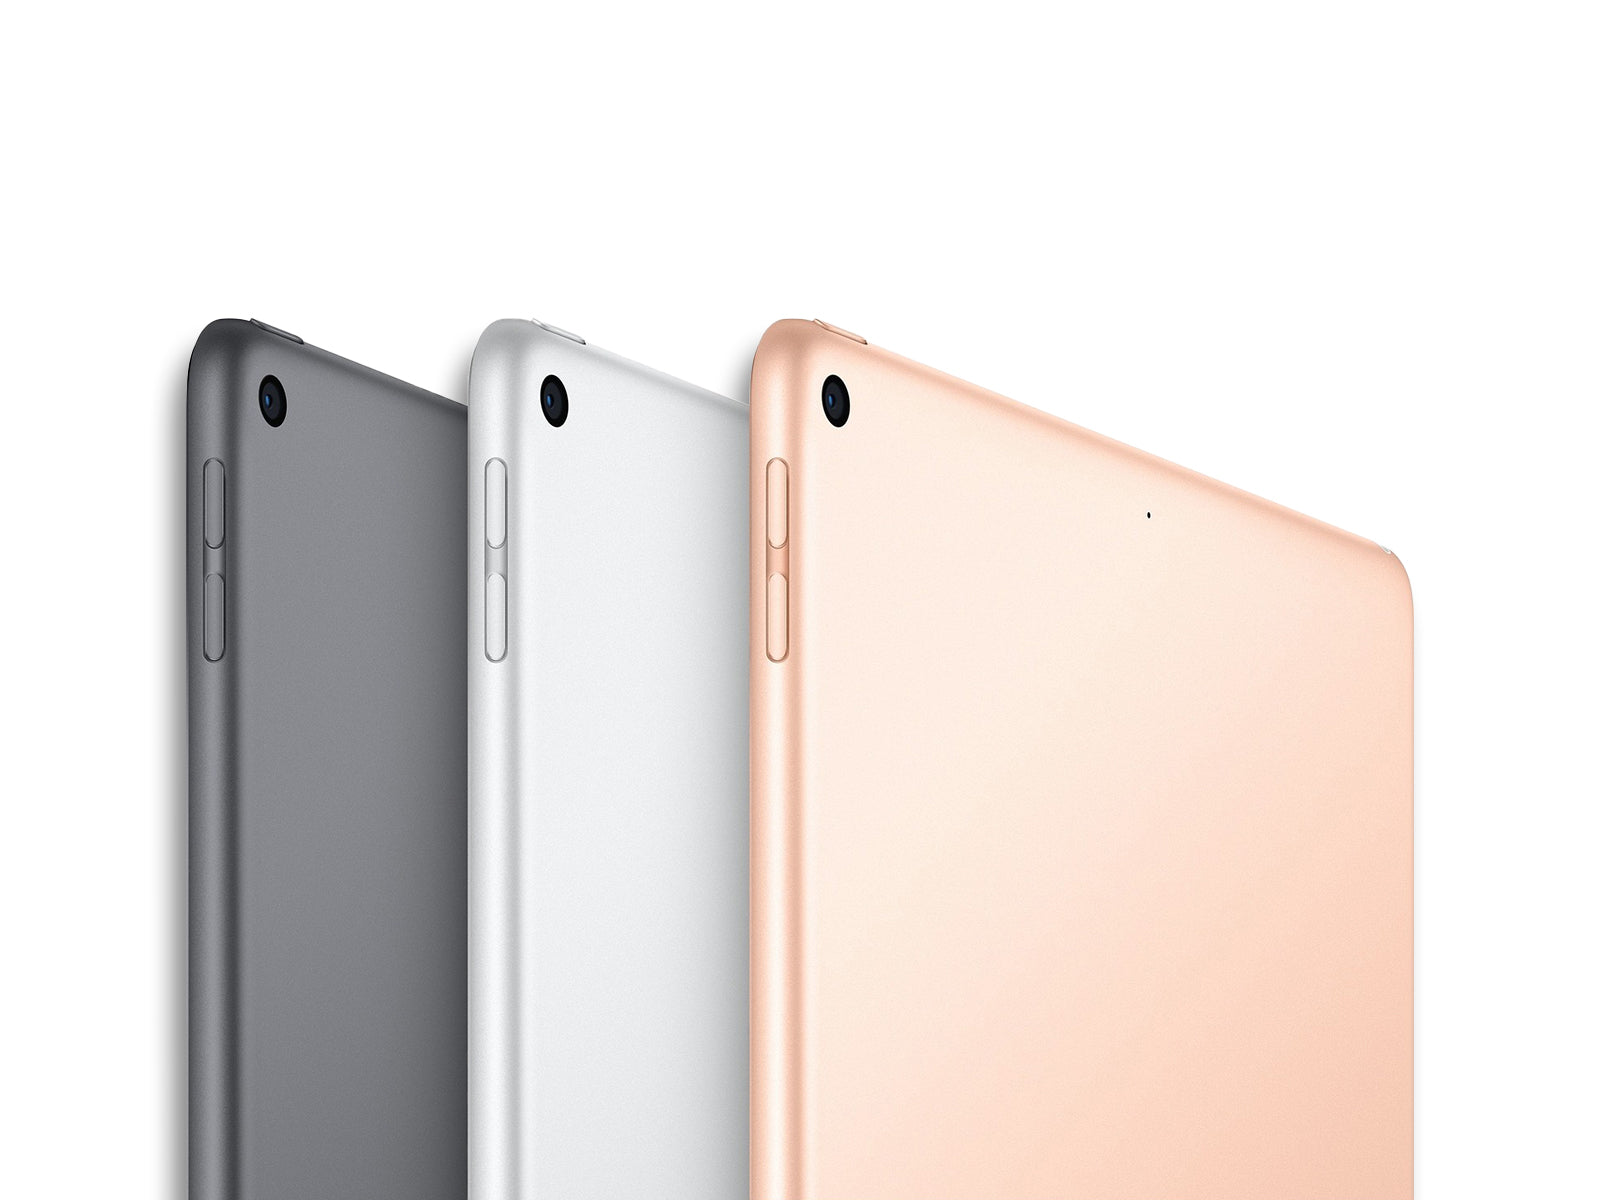 Apple iPad Mini 5th Gen 2019 In Colours Space Grey, Silver And Gold Back